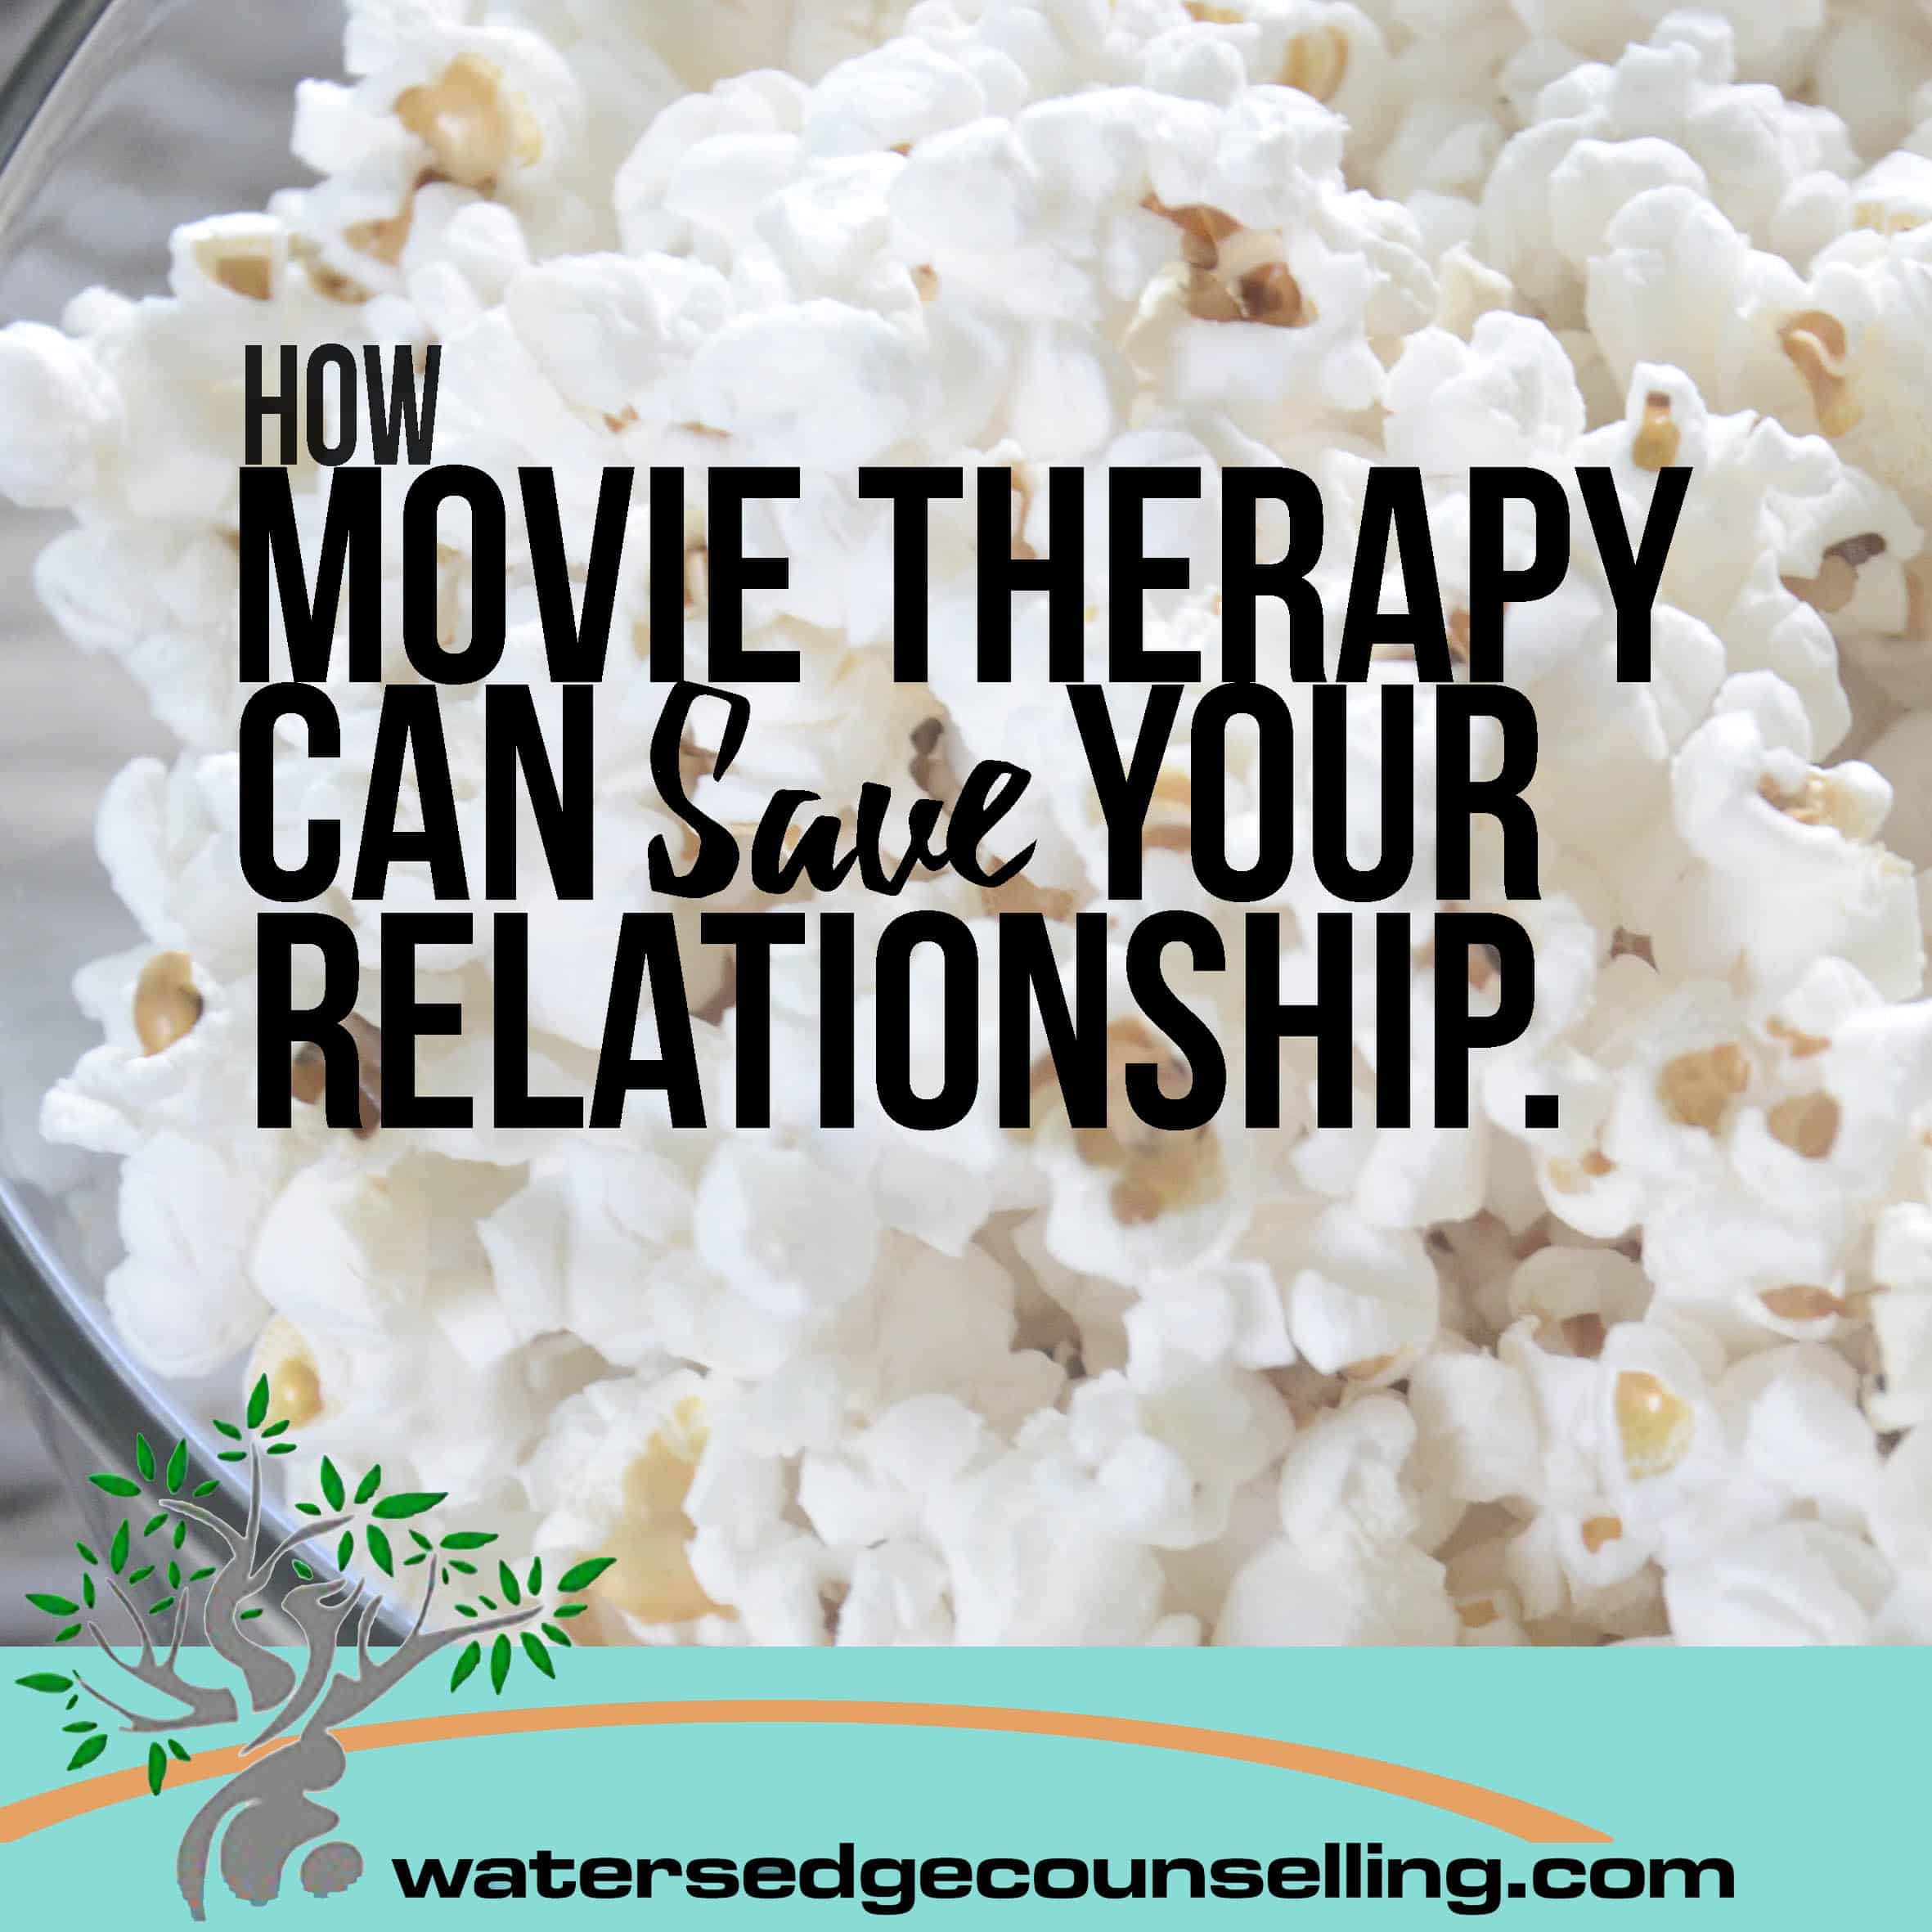 How Movie Therapy Can Save Your Relationship